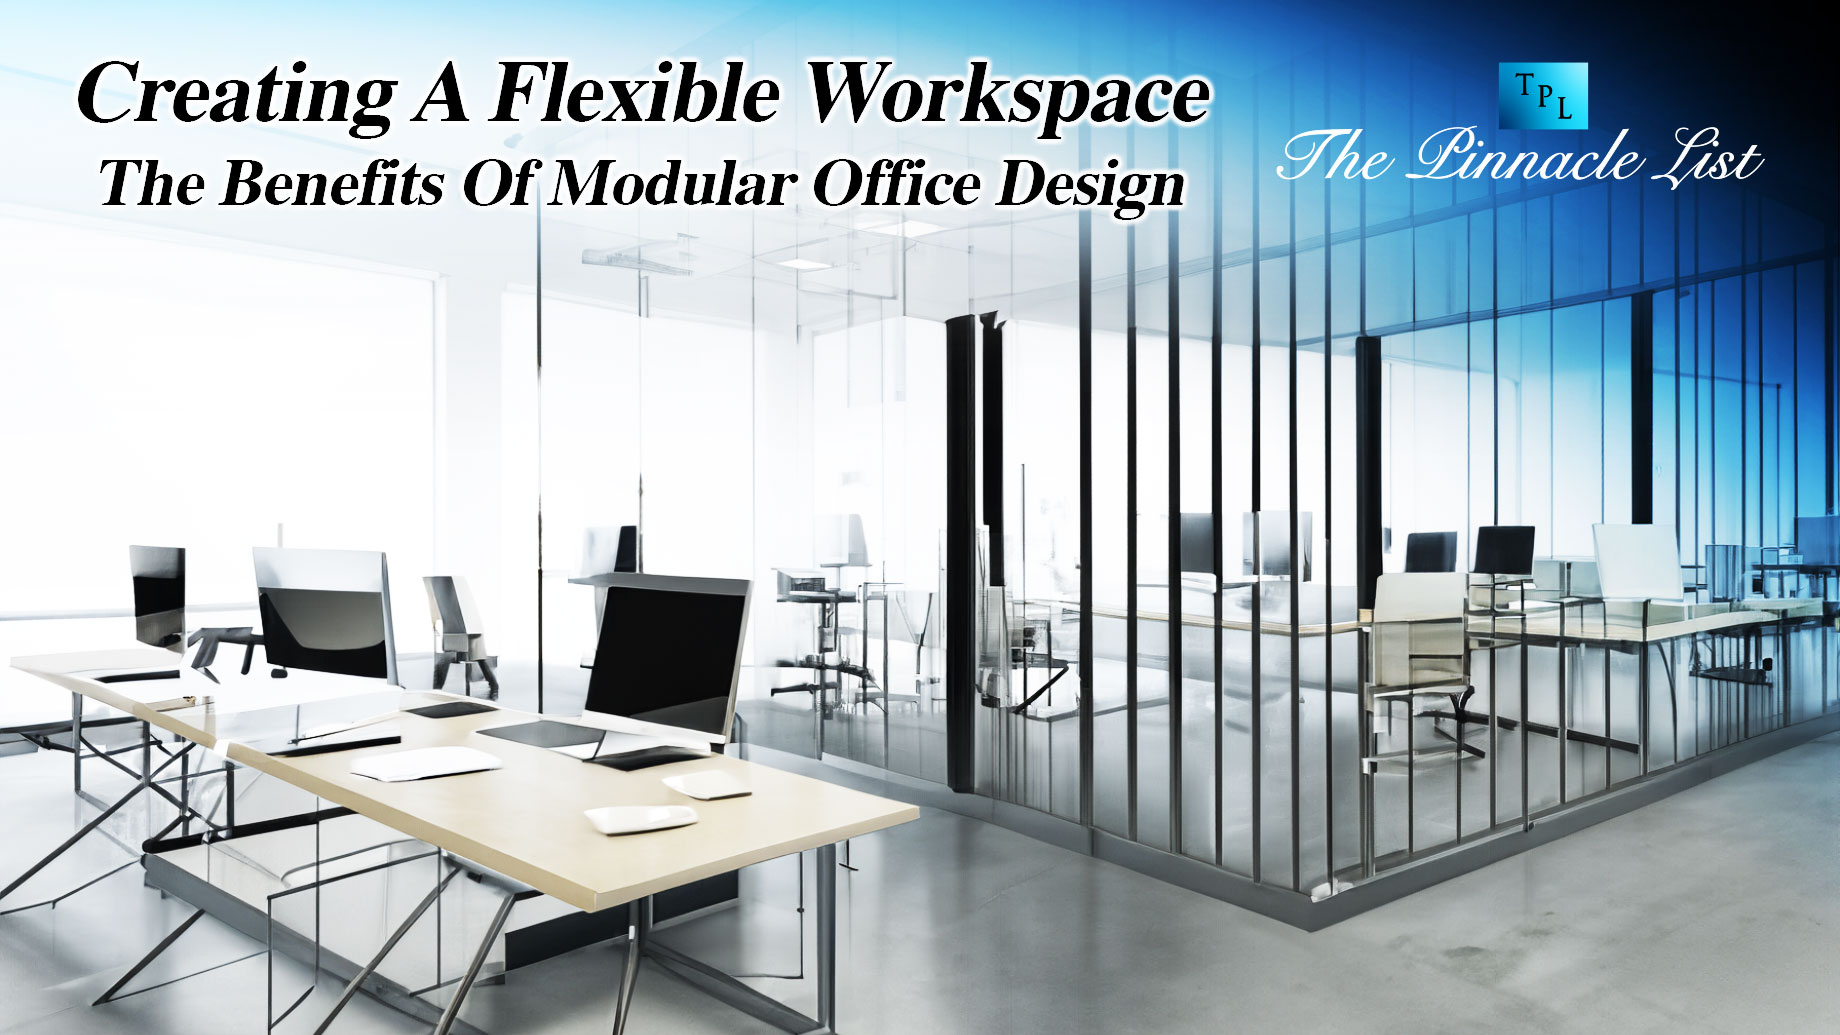 Creating A Flexible Workspace: The Benefits Of Modular Office Design